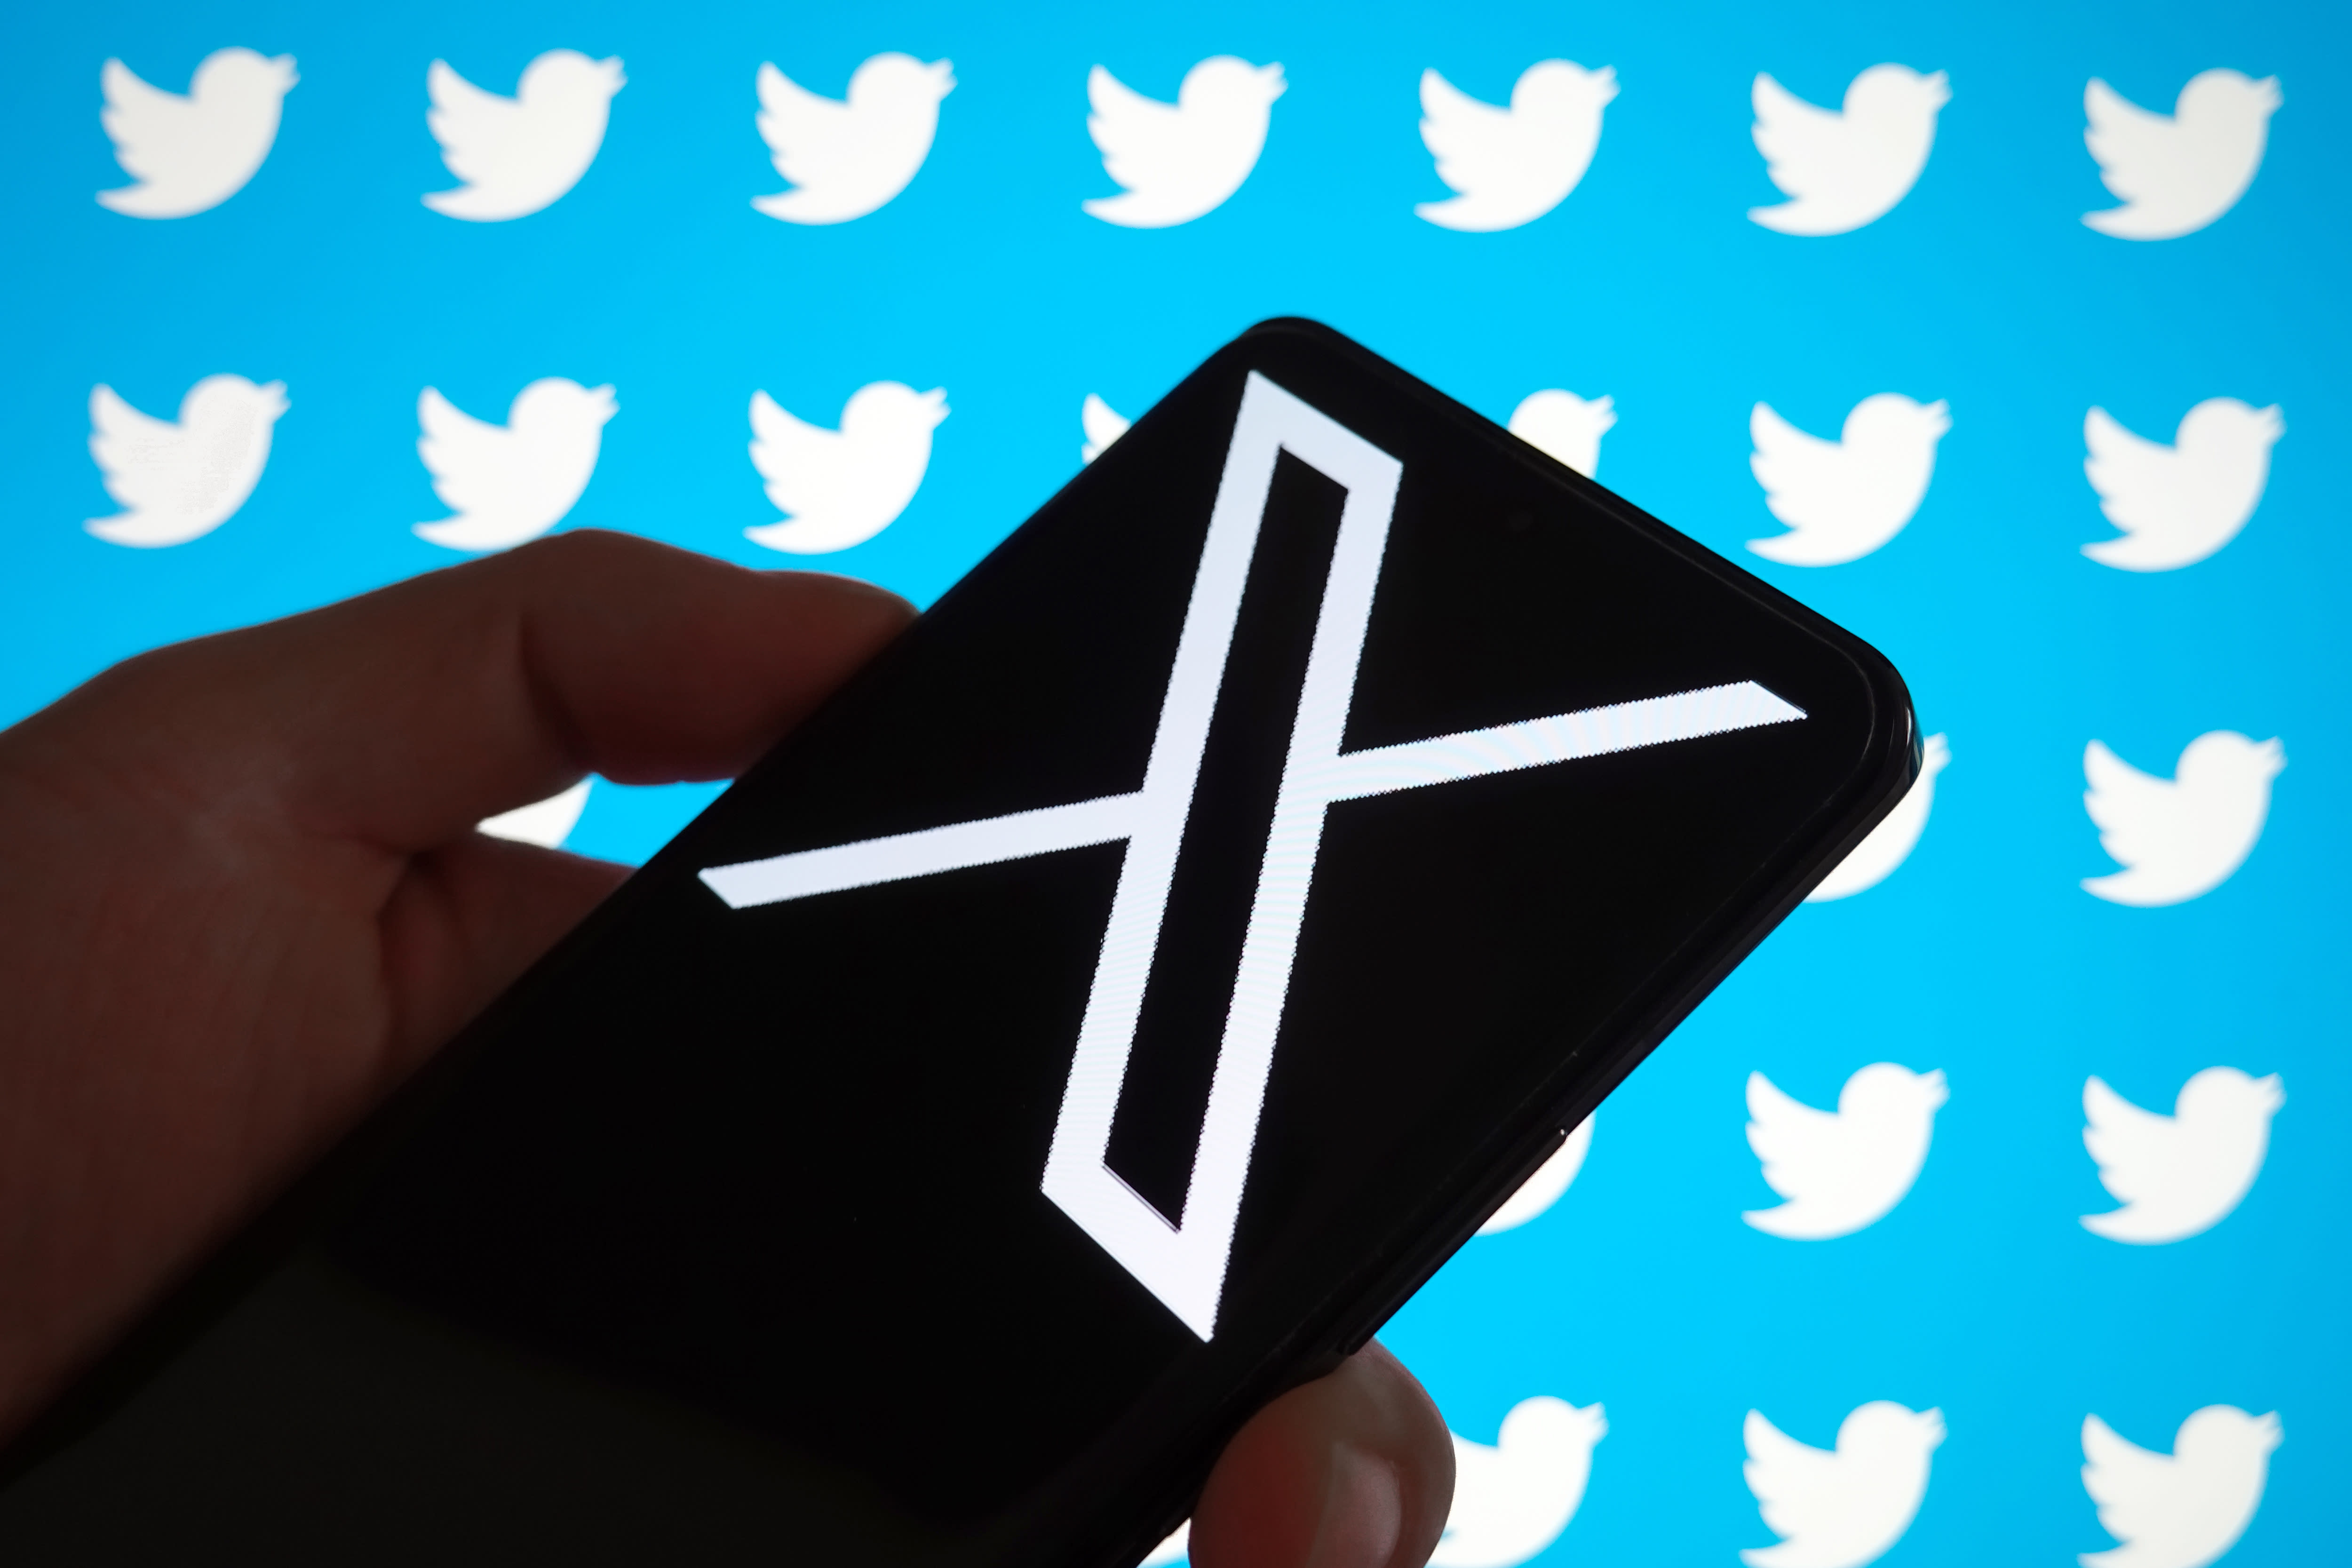 Read Twitter CEO Linda Yaccarino’s message about the ‘X’ rebrand